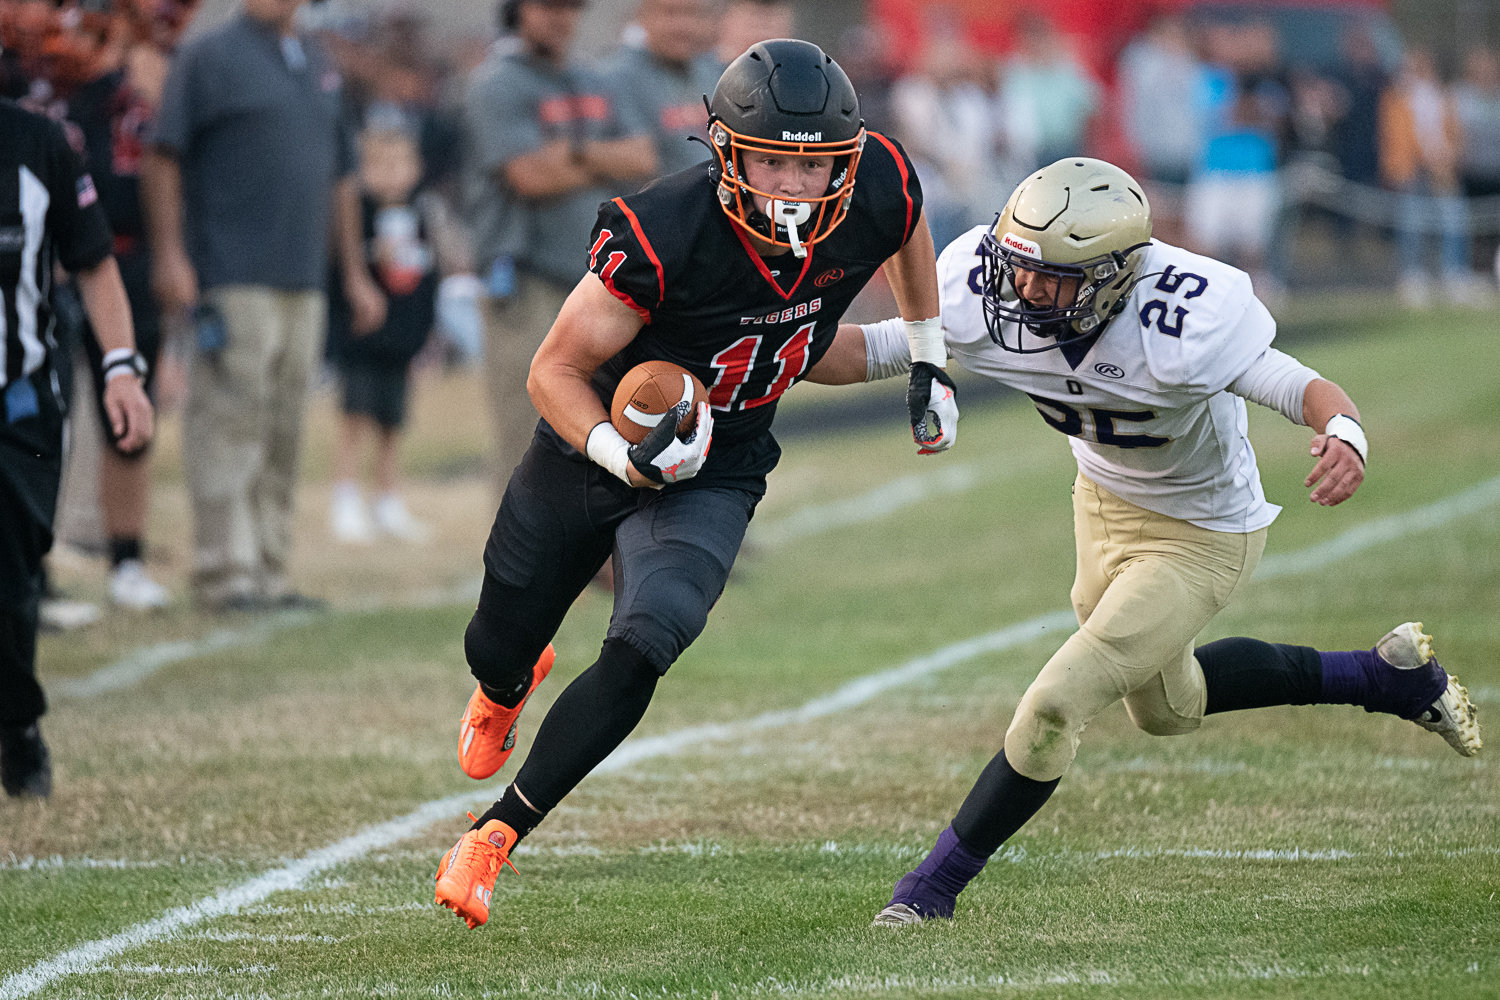 Napavine's Colin Shields separates from an Ony defender Sept. 9.